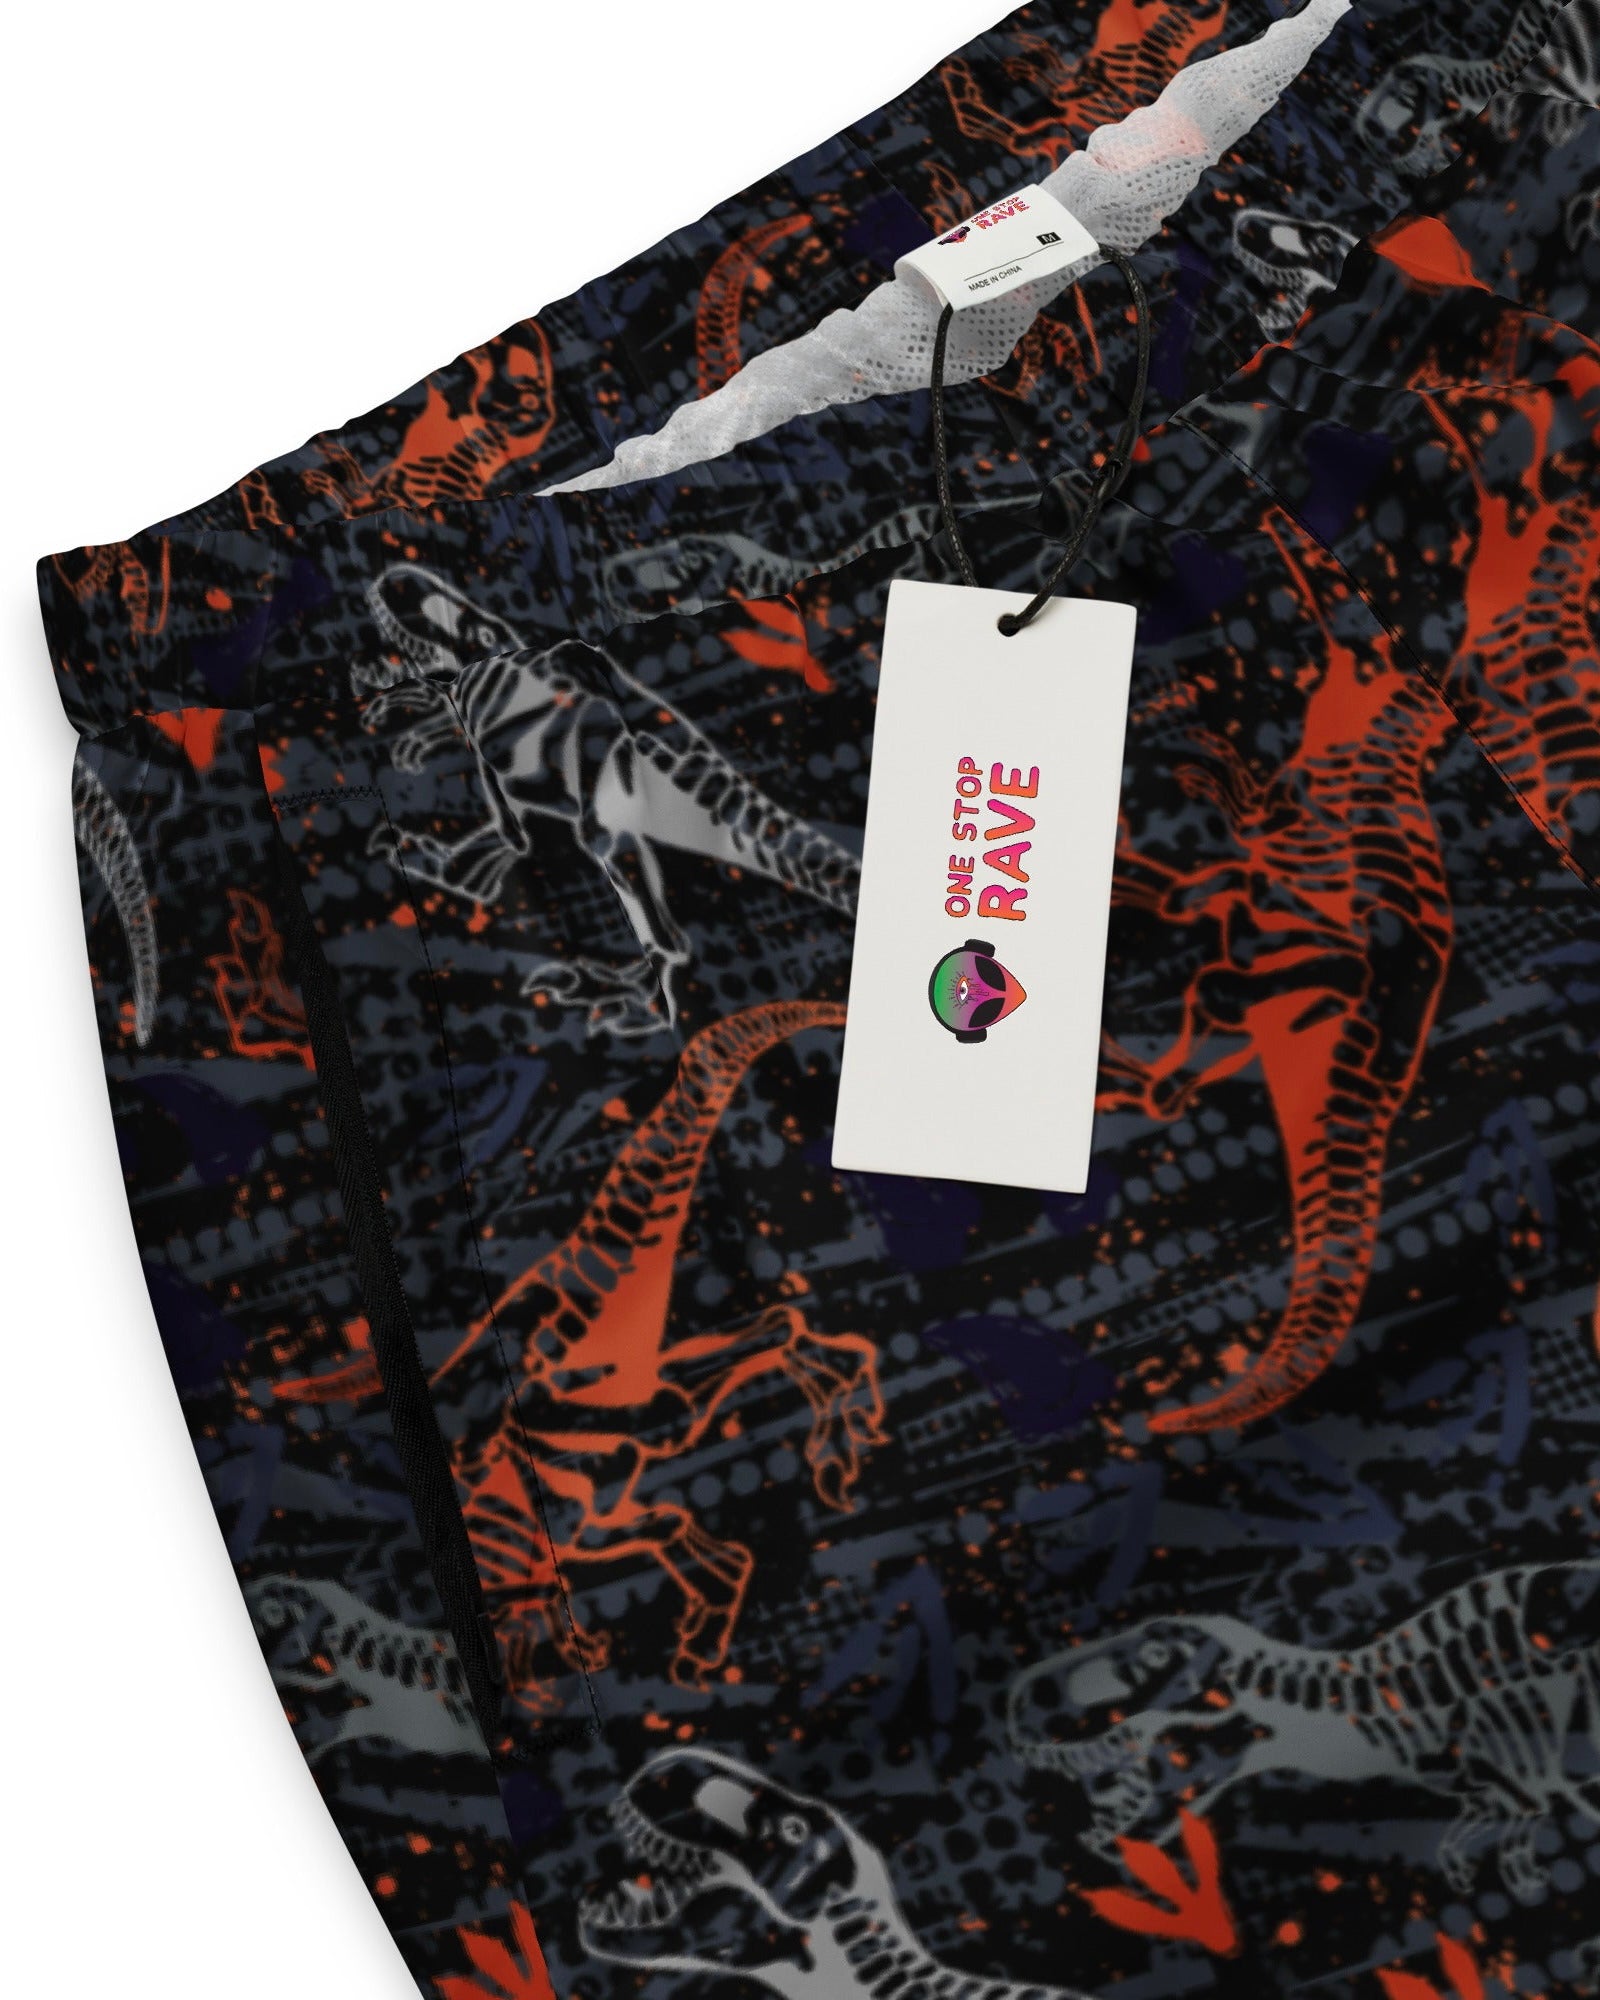 Close-up view of One Stop Rave's T-Wrecked Unisex Track Pants.